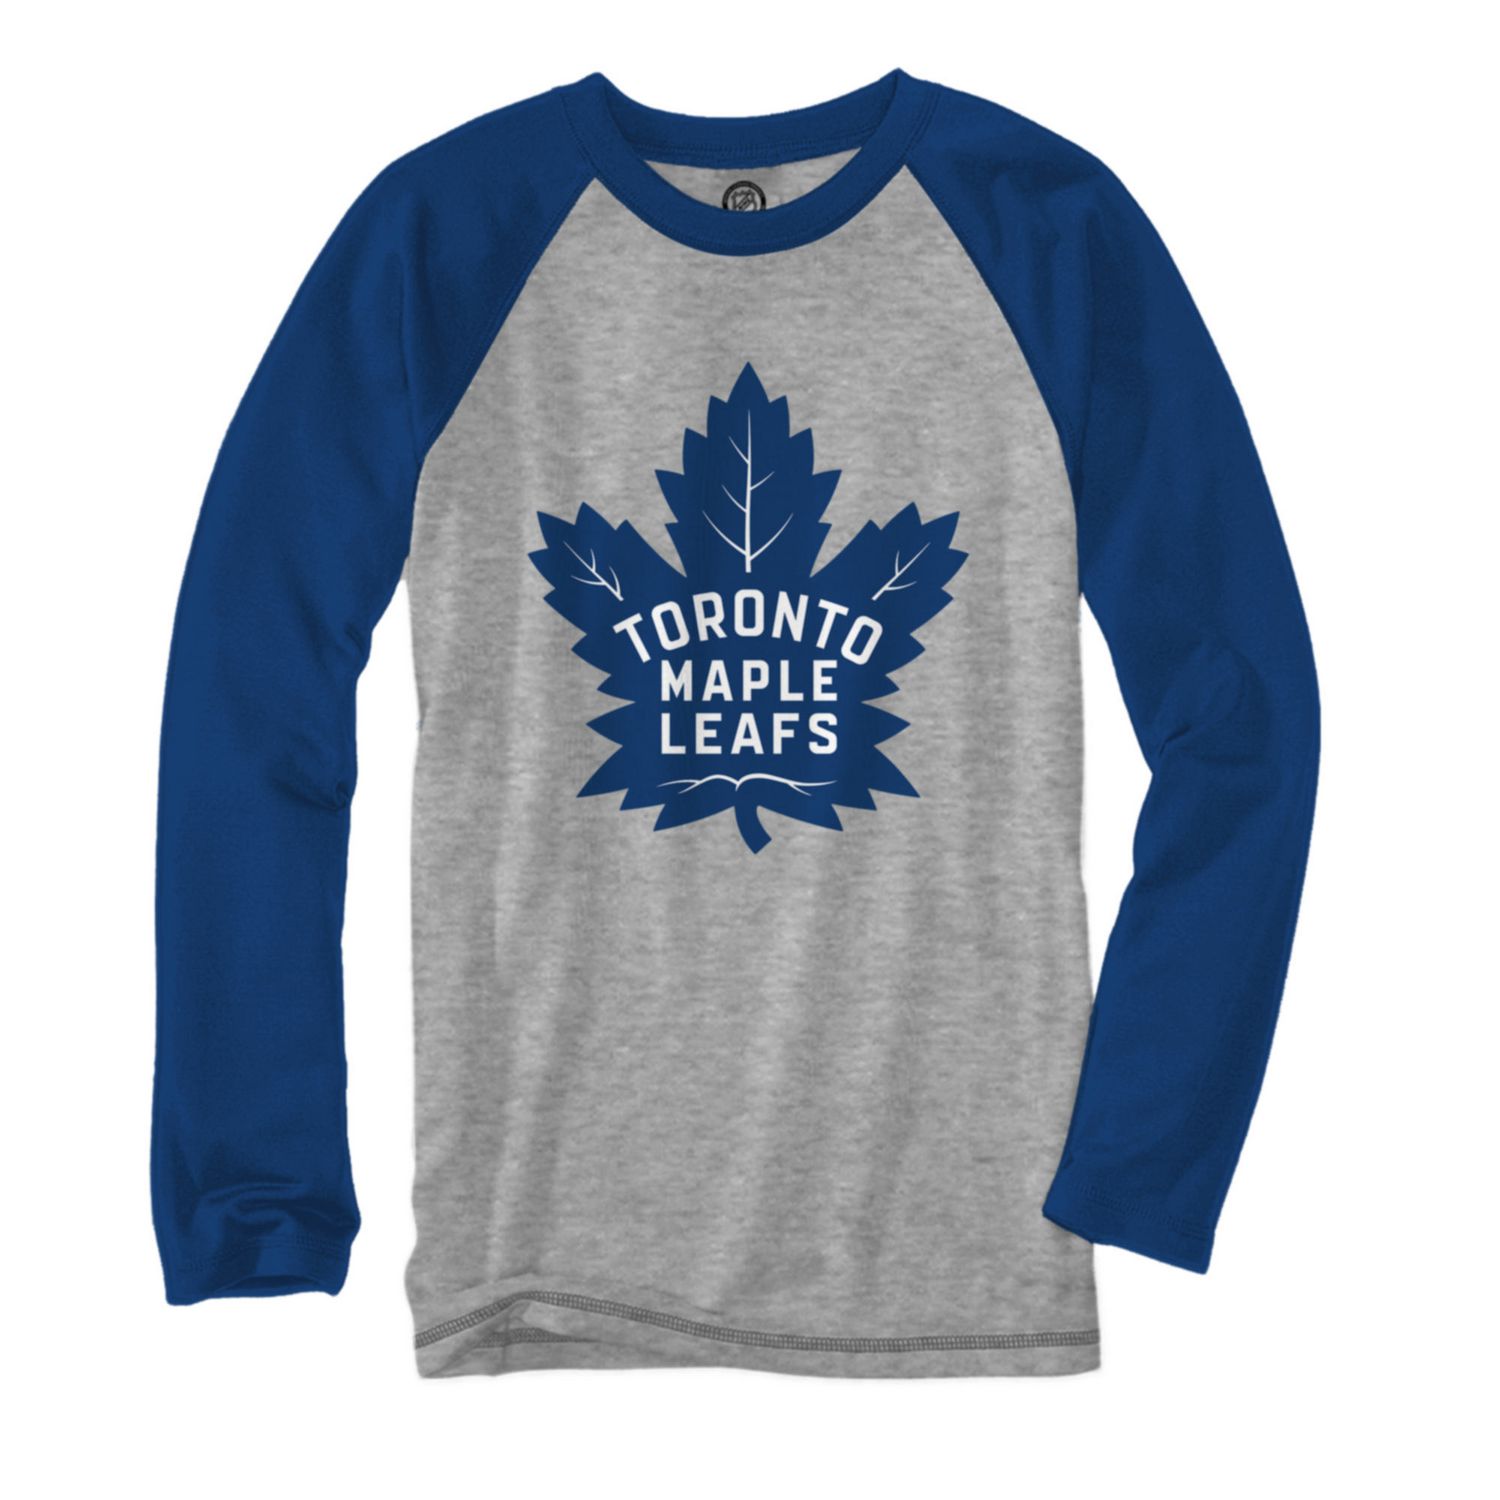 Men's Starter Navy Toronto Maple Leafs Arch City Theme Graphic Long Sleeve T-Shirt Size: Large